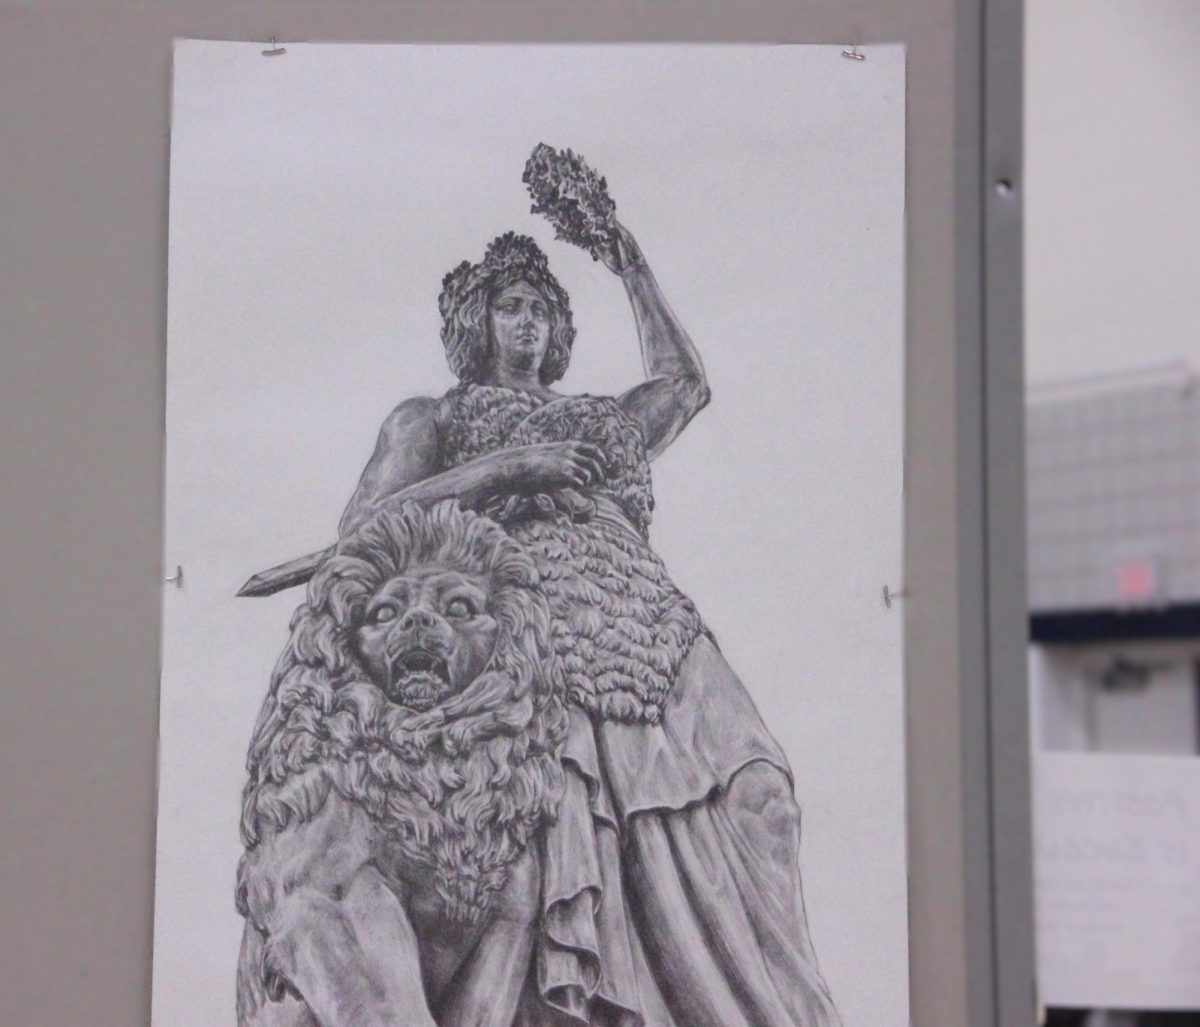 Senior+Clara+Squio+De+Cezaros+drawing+of+the+Bavaria+Statue+proved+to+be+a+favorite+by+students+and+teachers+alike.+With+just+a+graphite+pencil+she+created+this+fan+favorite%2C+working+hours+at+a+time+until+completion.+